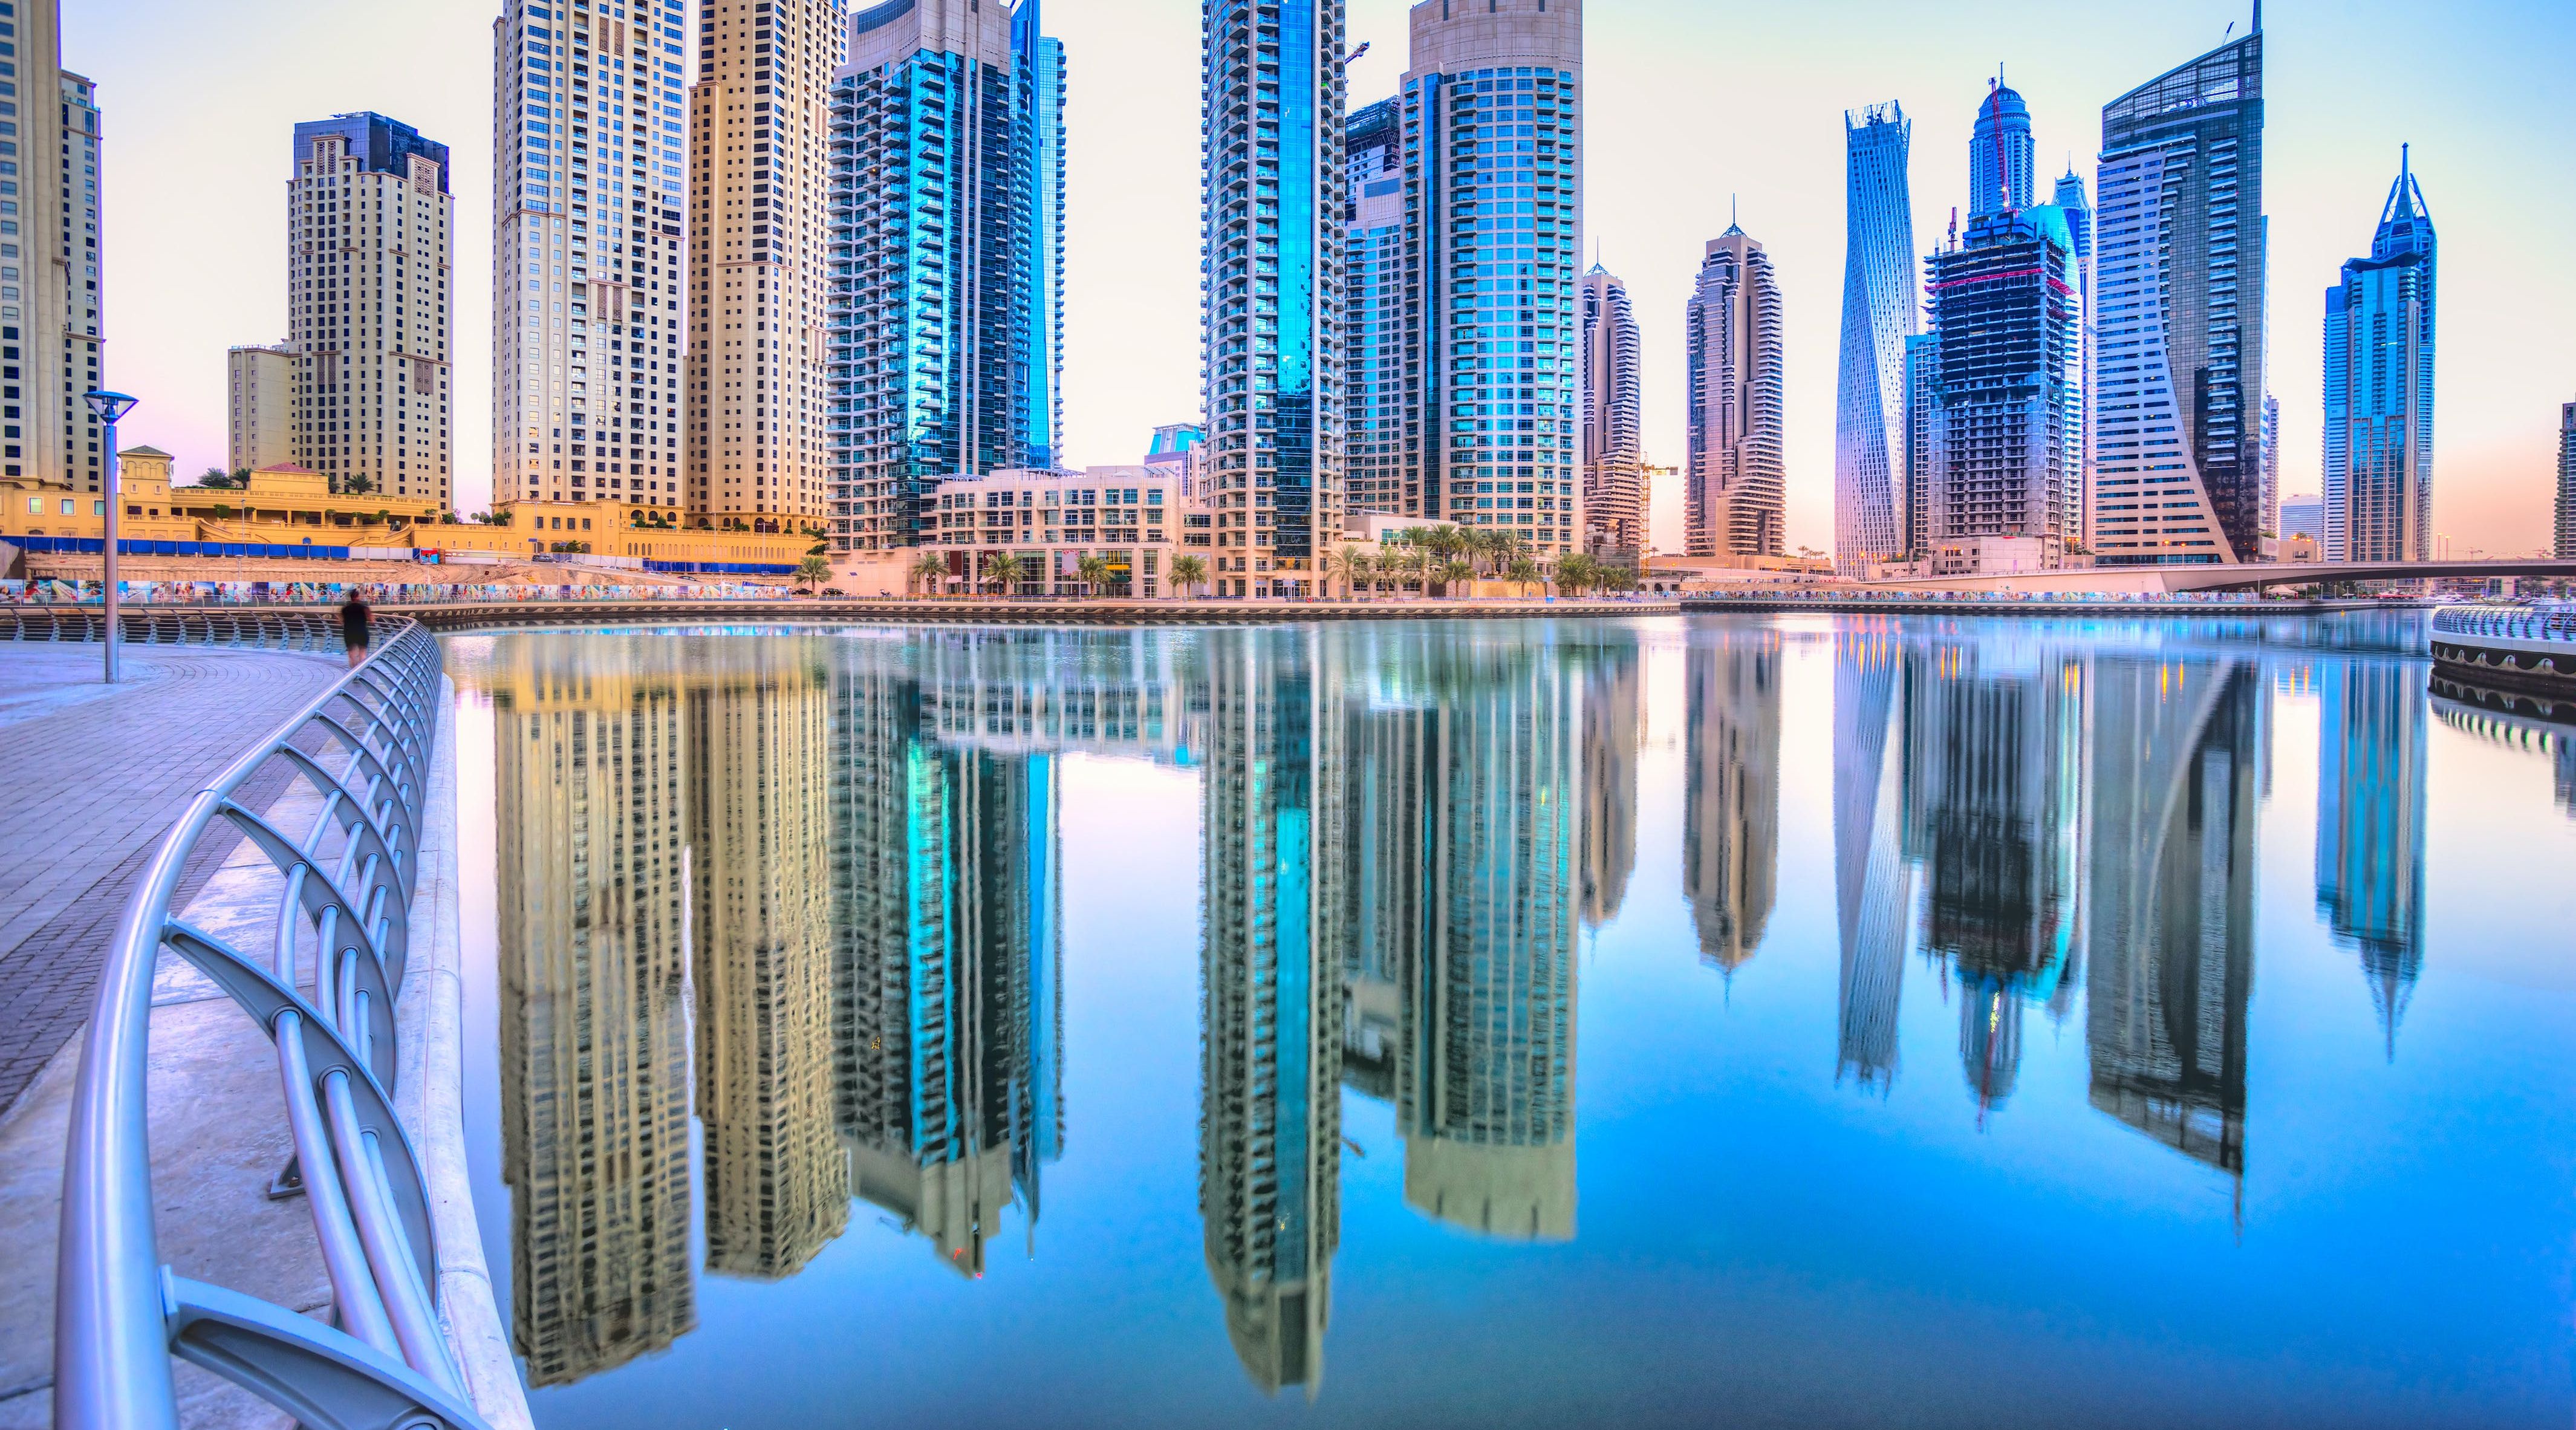 Dubai businesses will not be required to carry out COVID-19 thermal screening from January 1